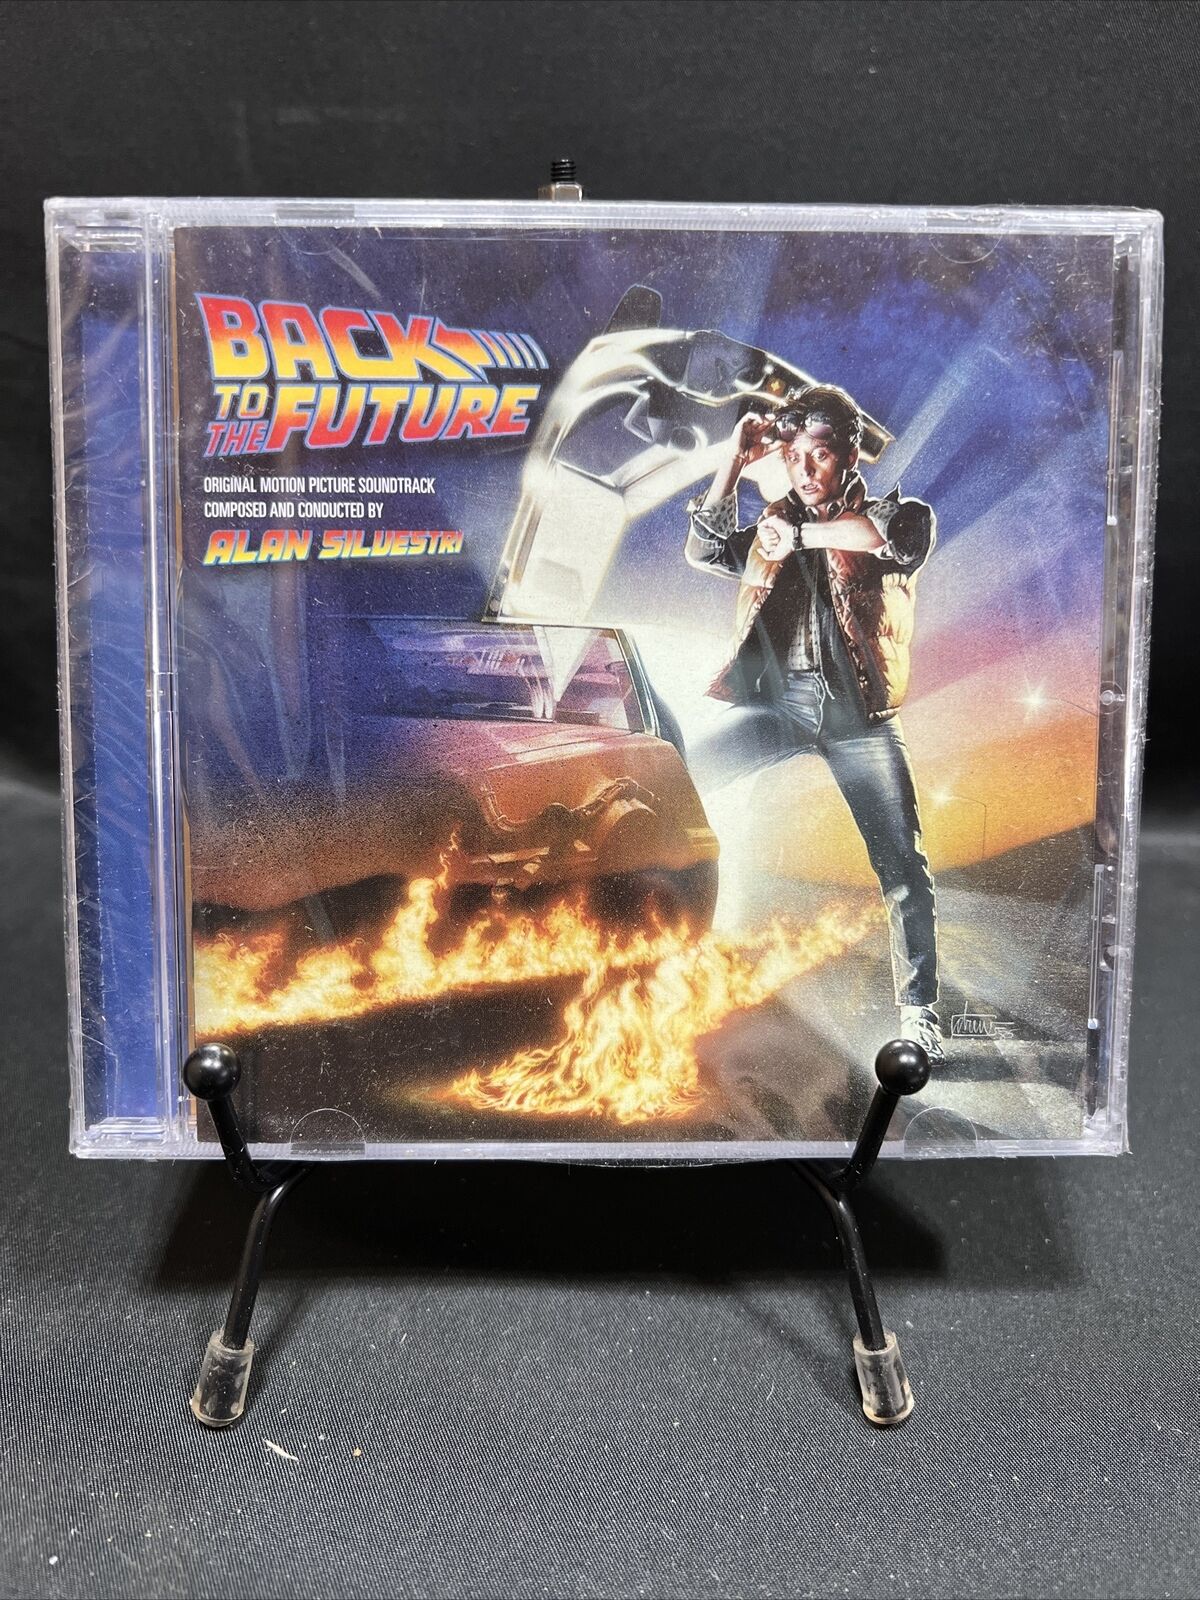 ALAN SILVESTRI: BACK TO THE FUTURE [CD] Cracked Case Sealed New